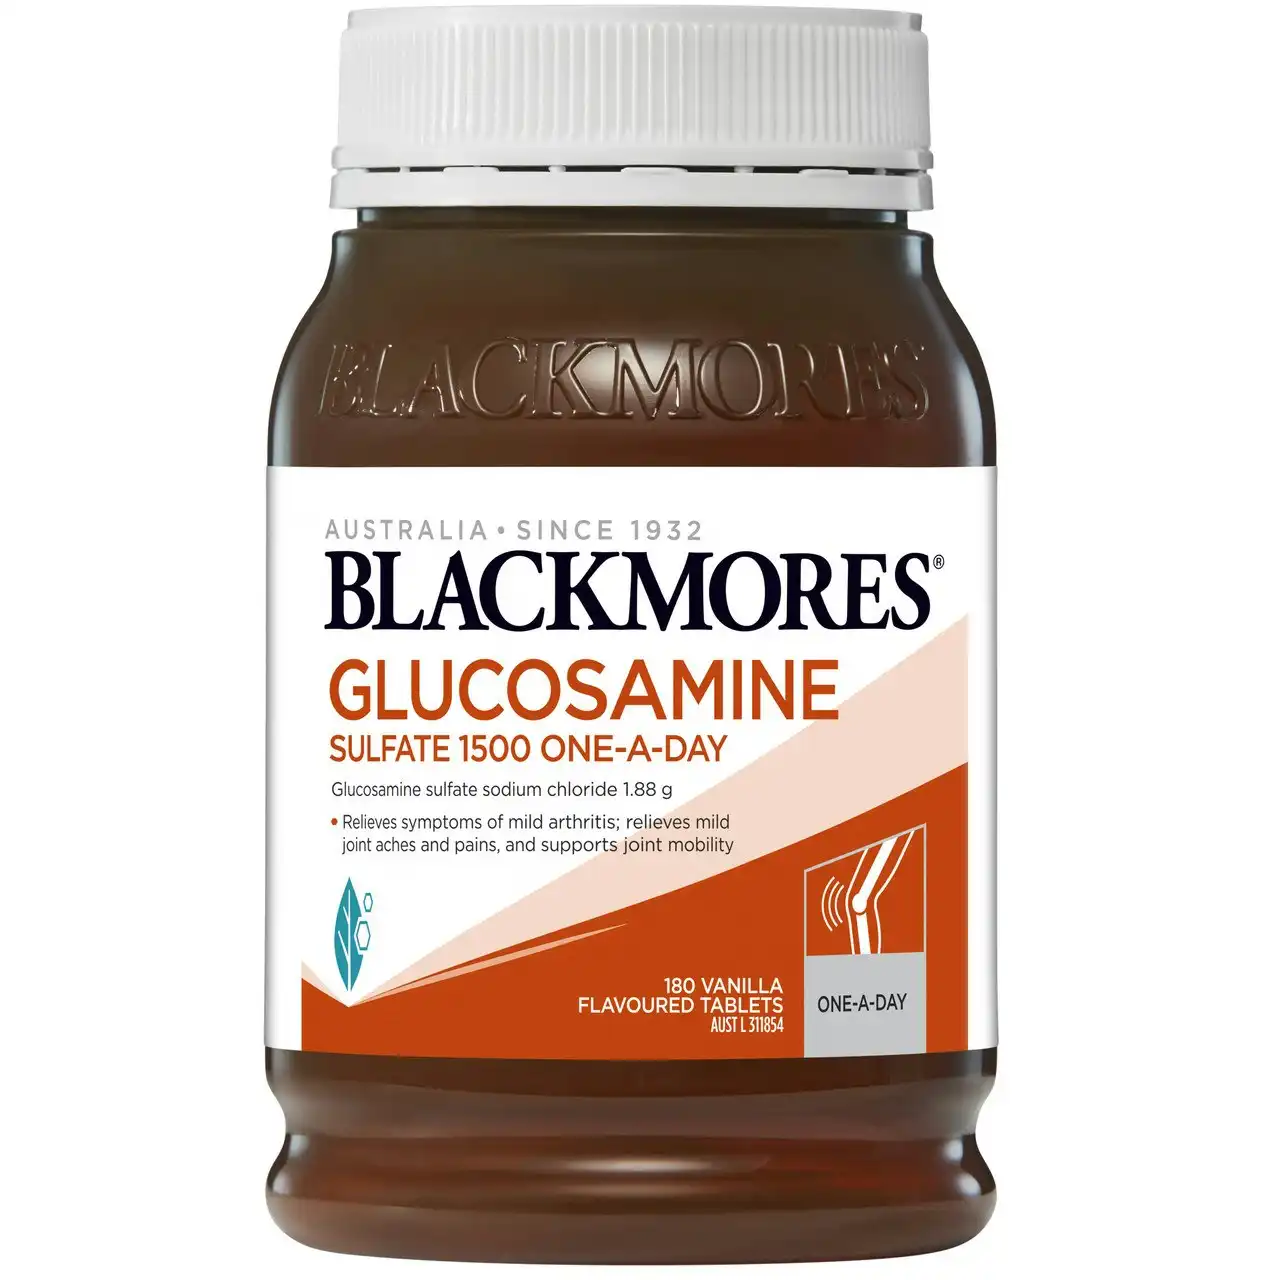 Blackmores Glucosamine Sulfate 1500 One-A-Day 180 Tablets